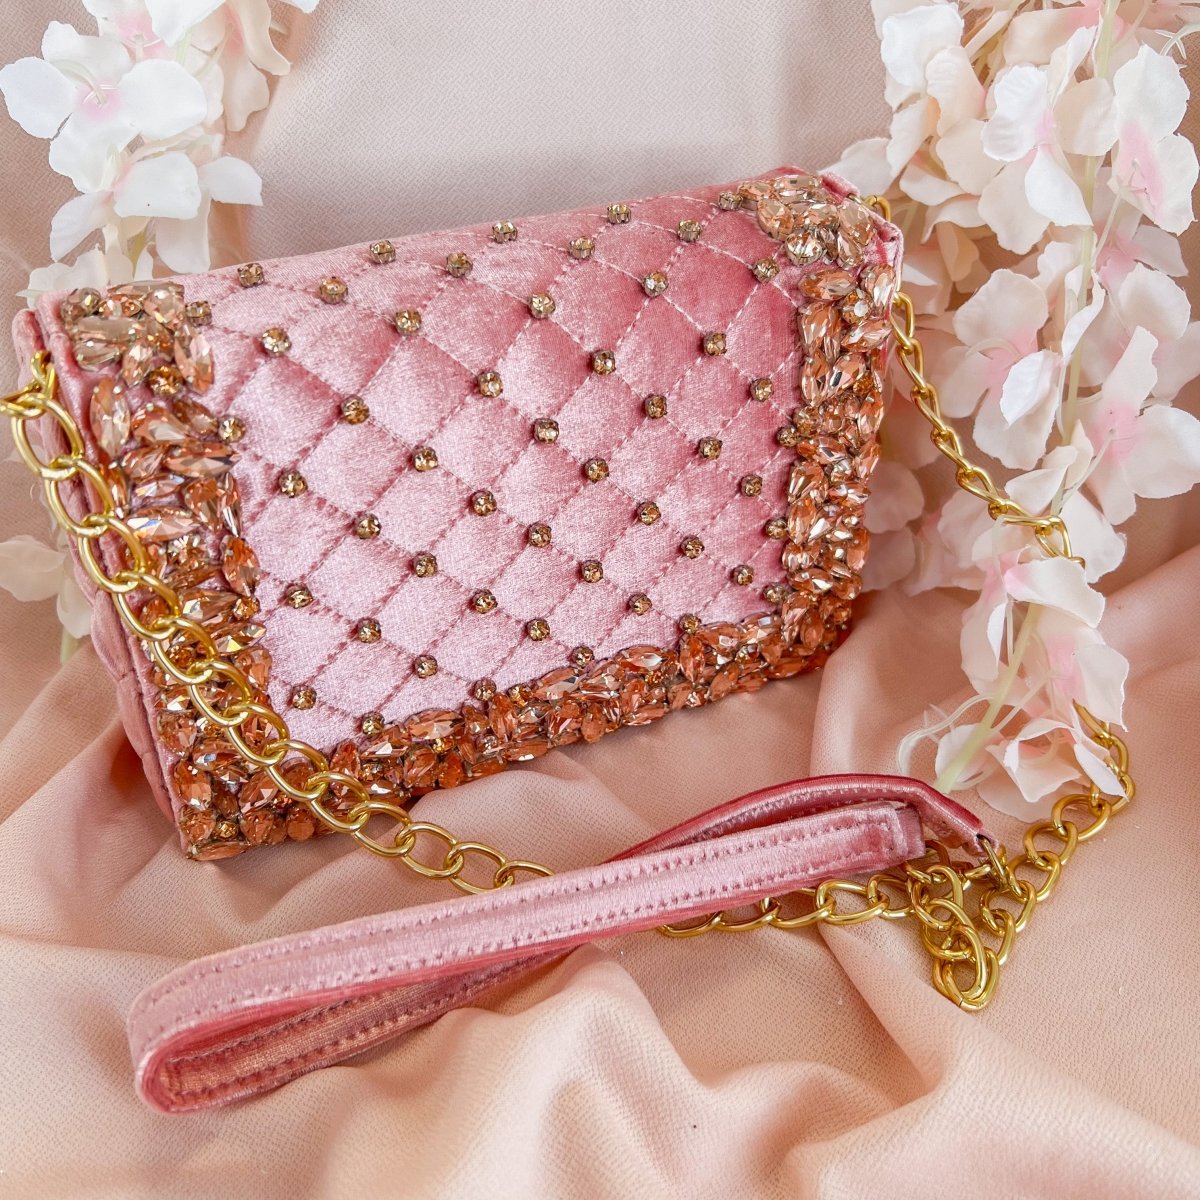 Buy Pink Clutch Bag With Detachable Cross-Body Chain from Next Ireland